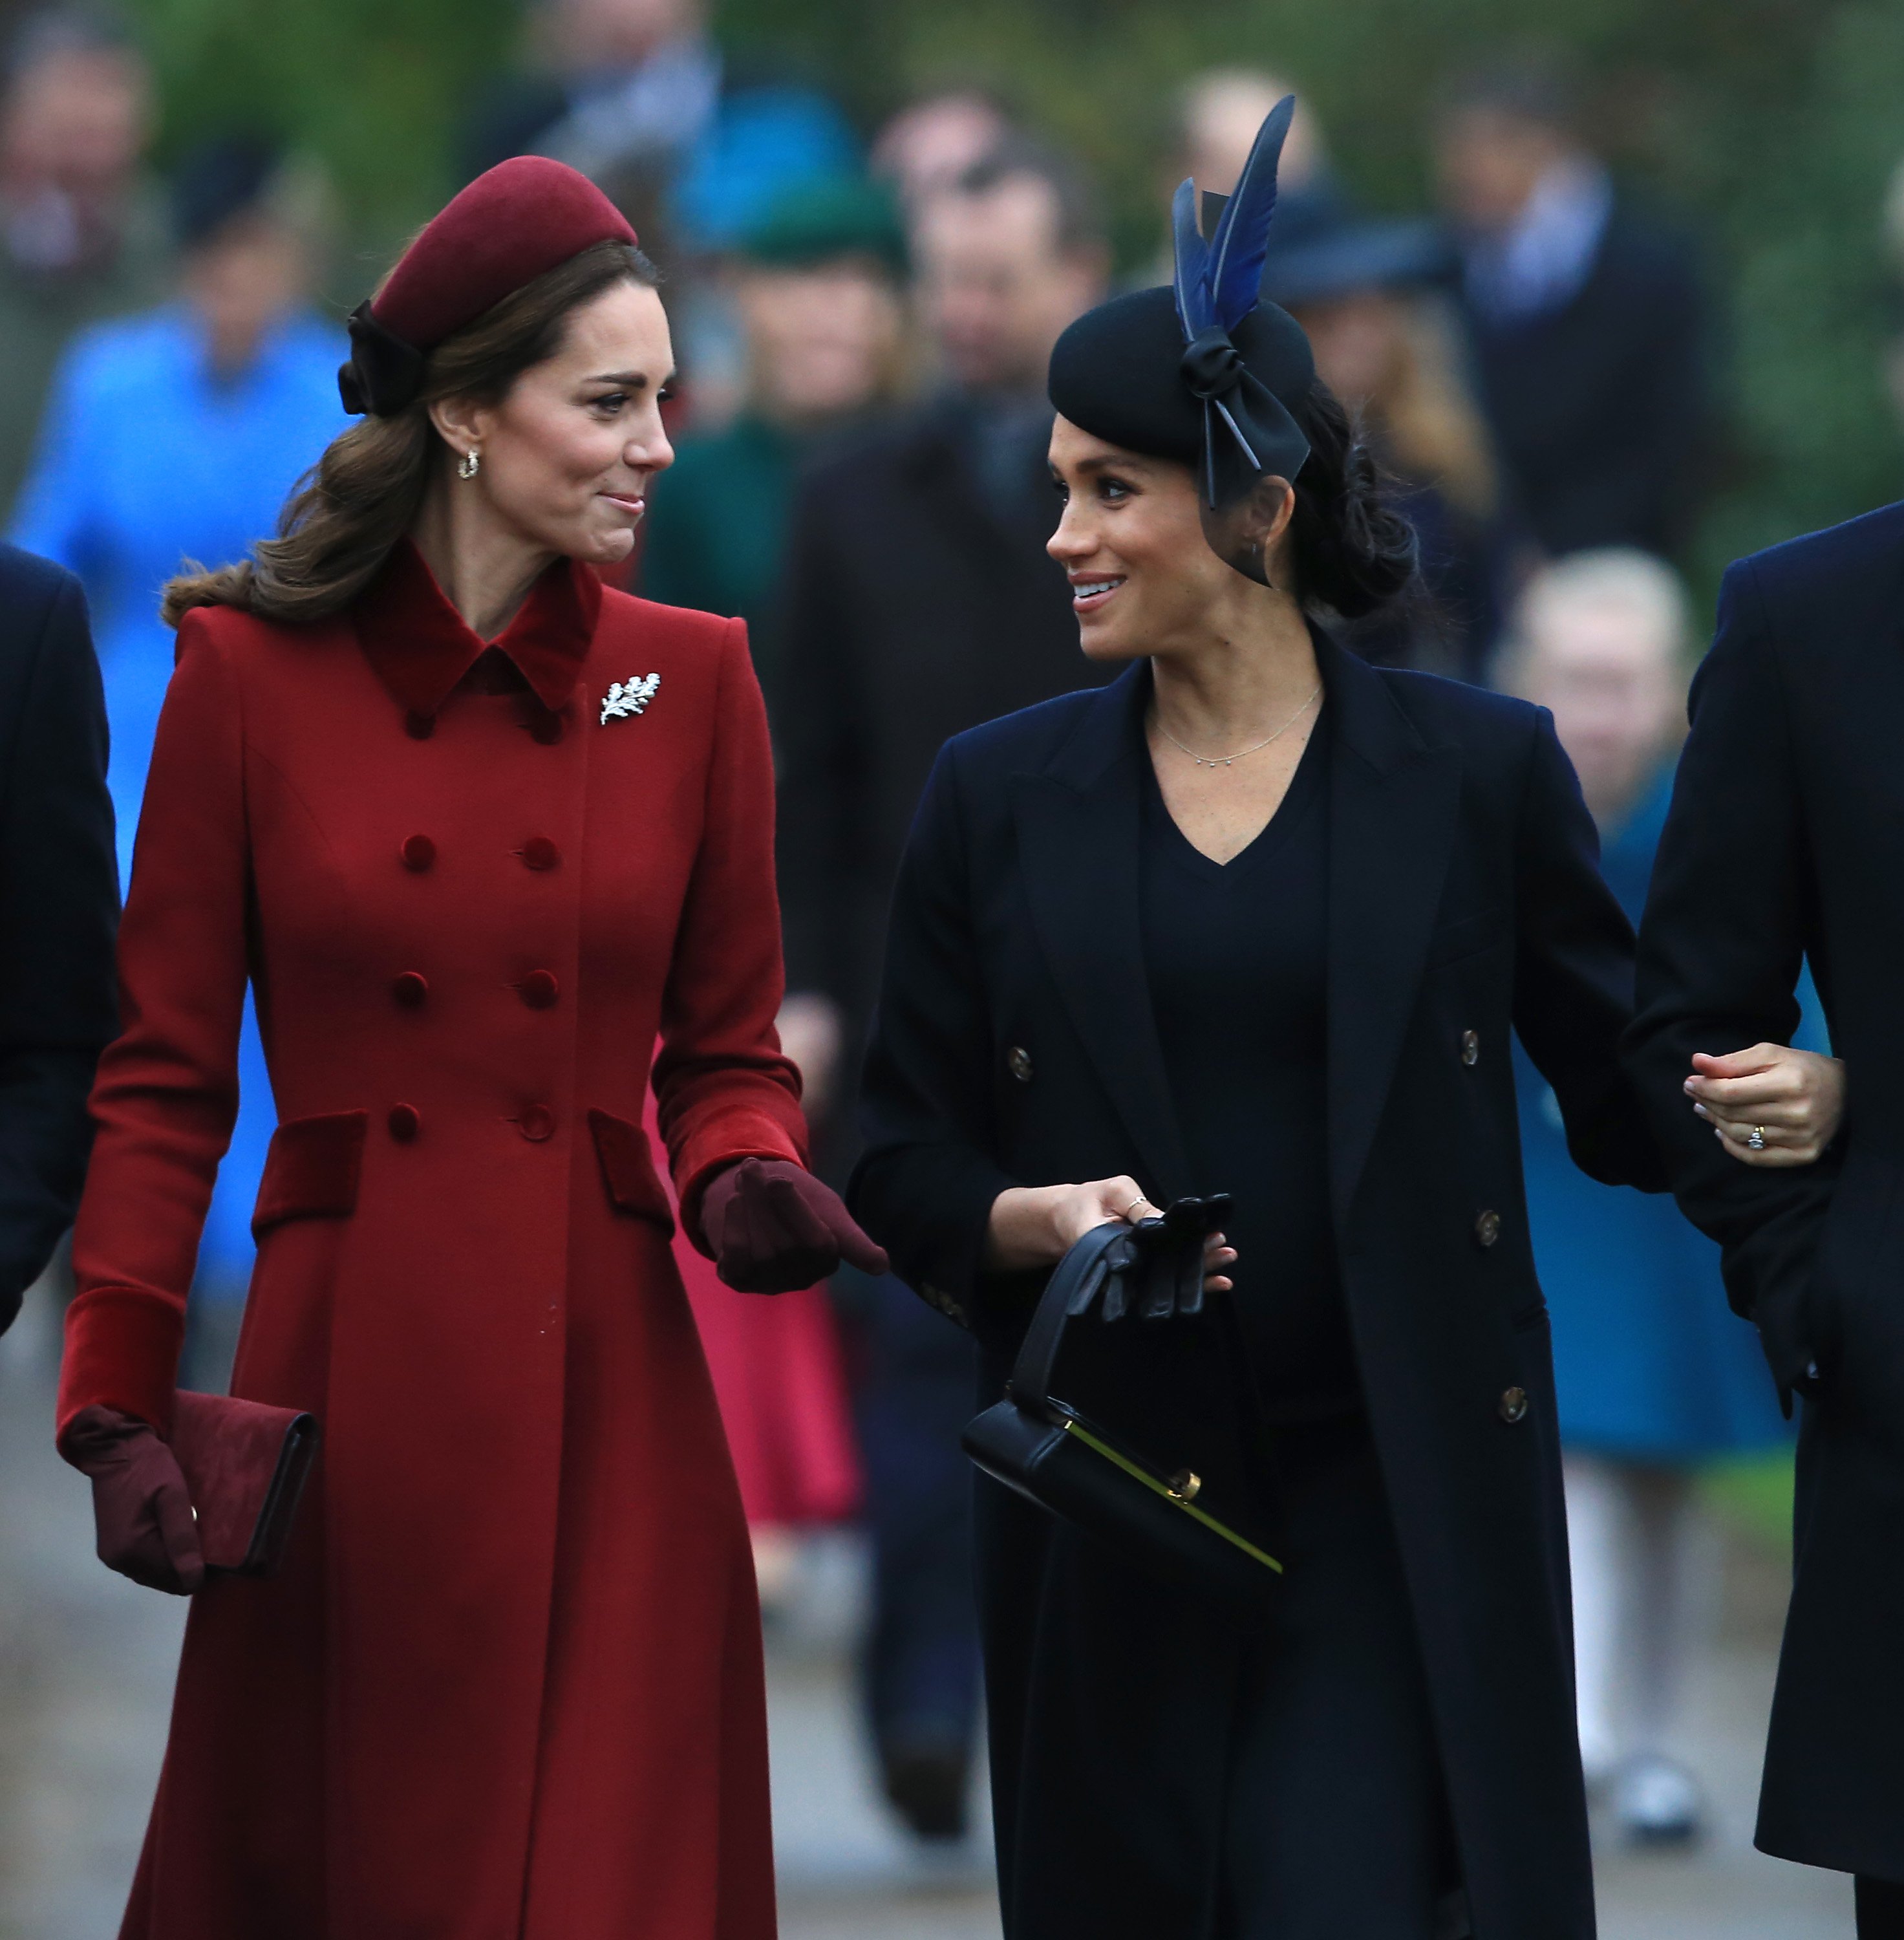 Kate Middleton and Meghan Markle attend the Christmas Day church service in December 2018 | Photo: Getty Images